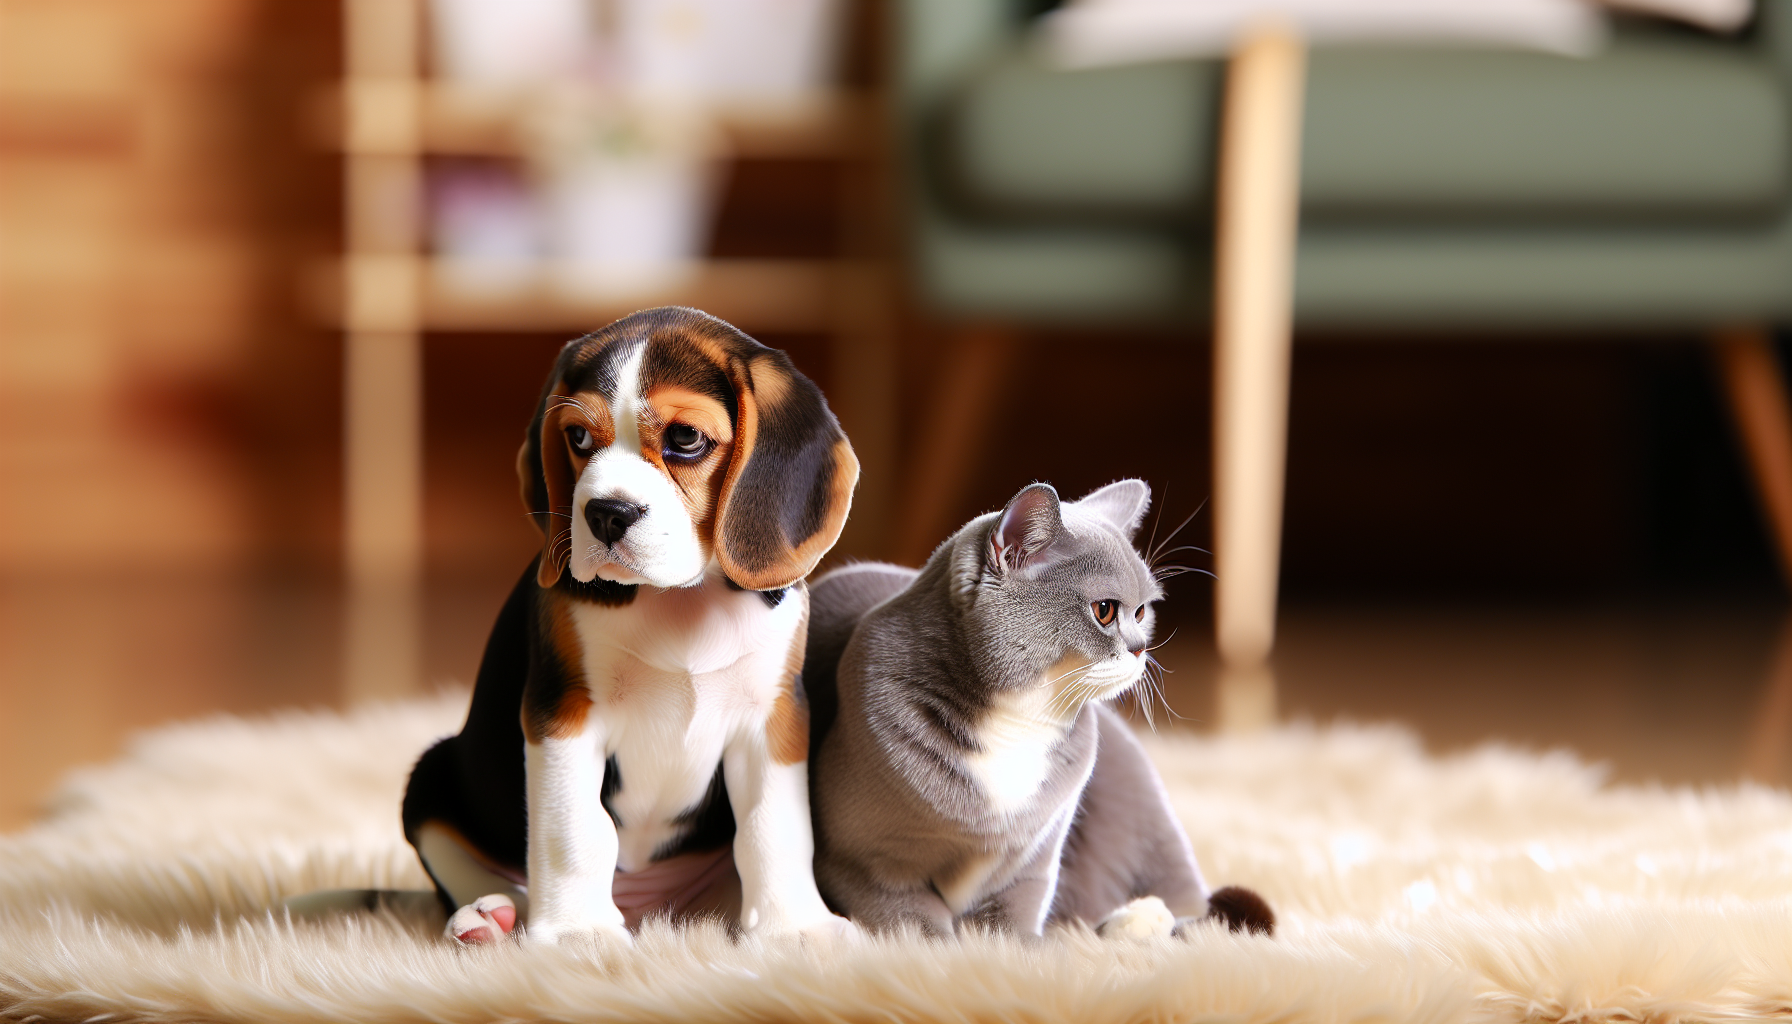 Beagle puppy and adult cat sitting